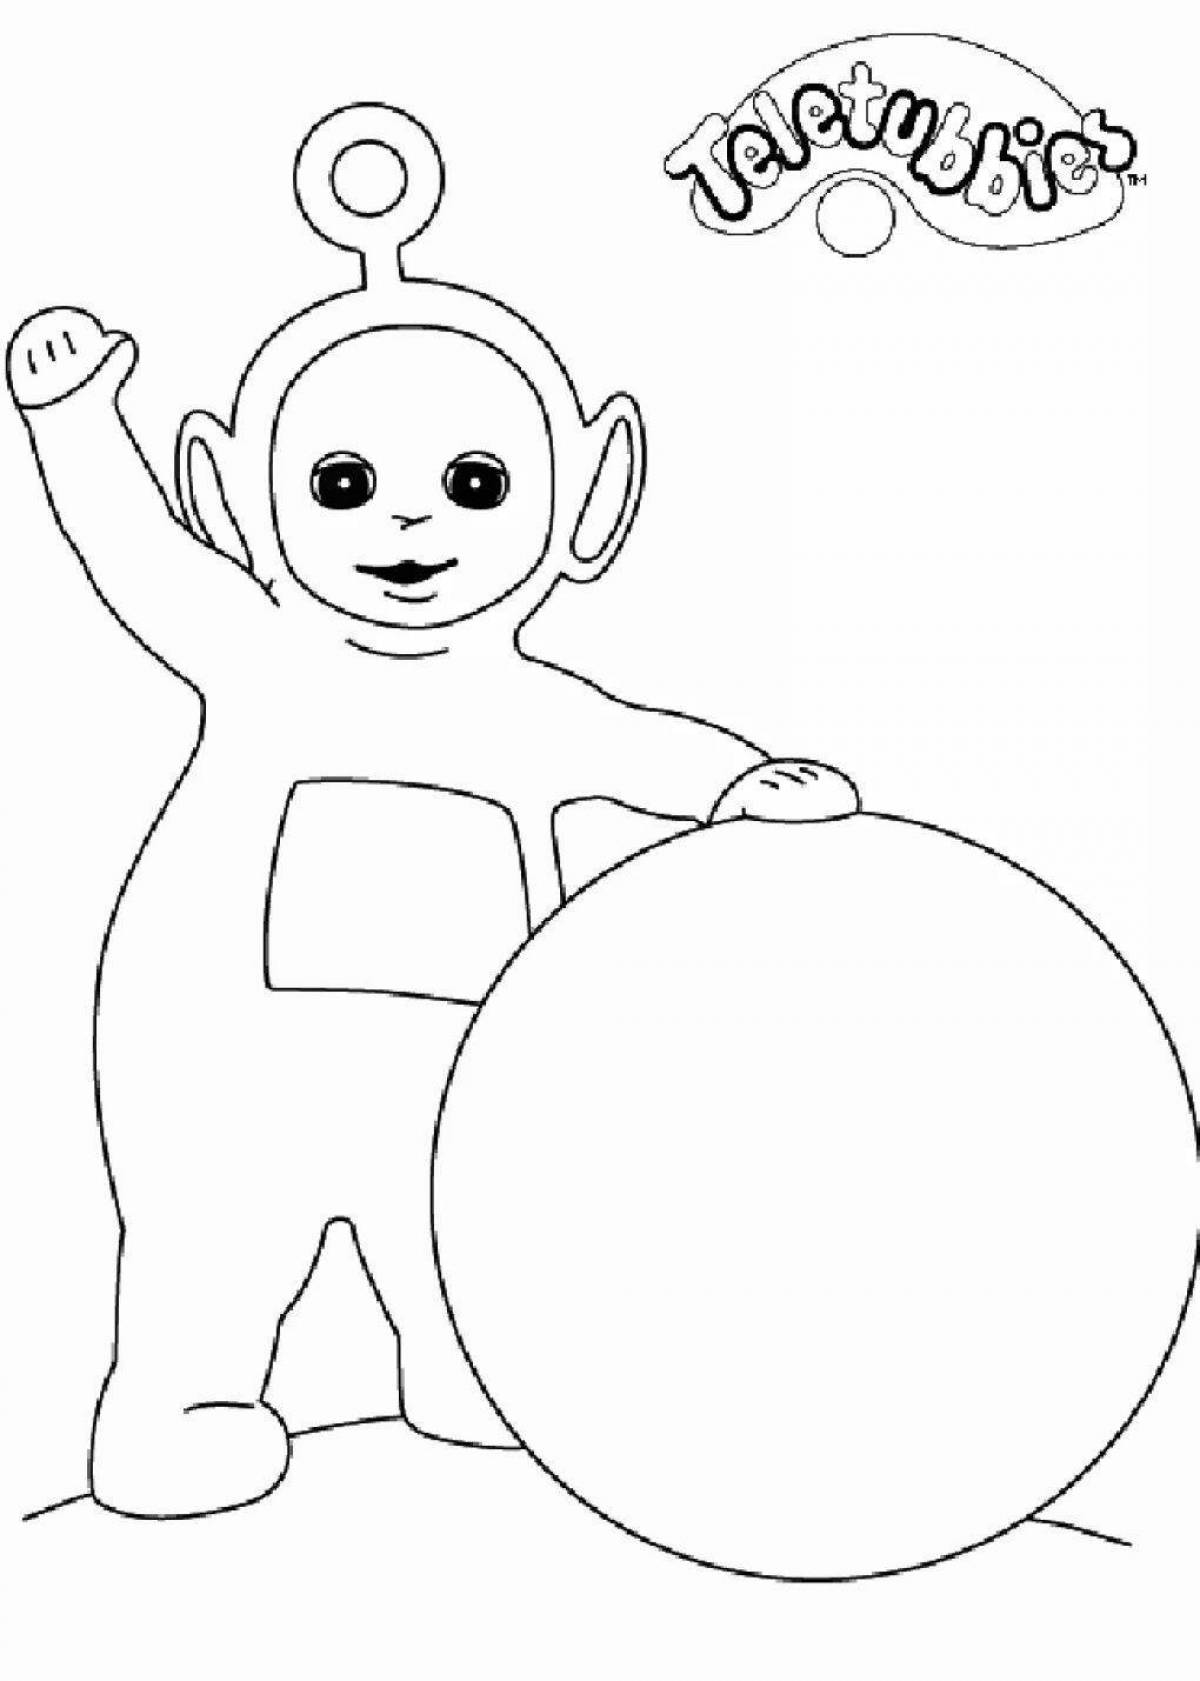 Slender-tubbies bright coloring pages